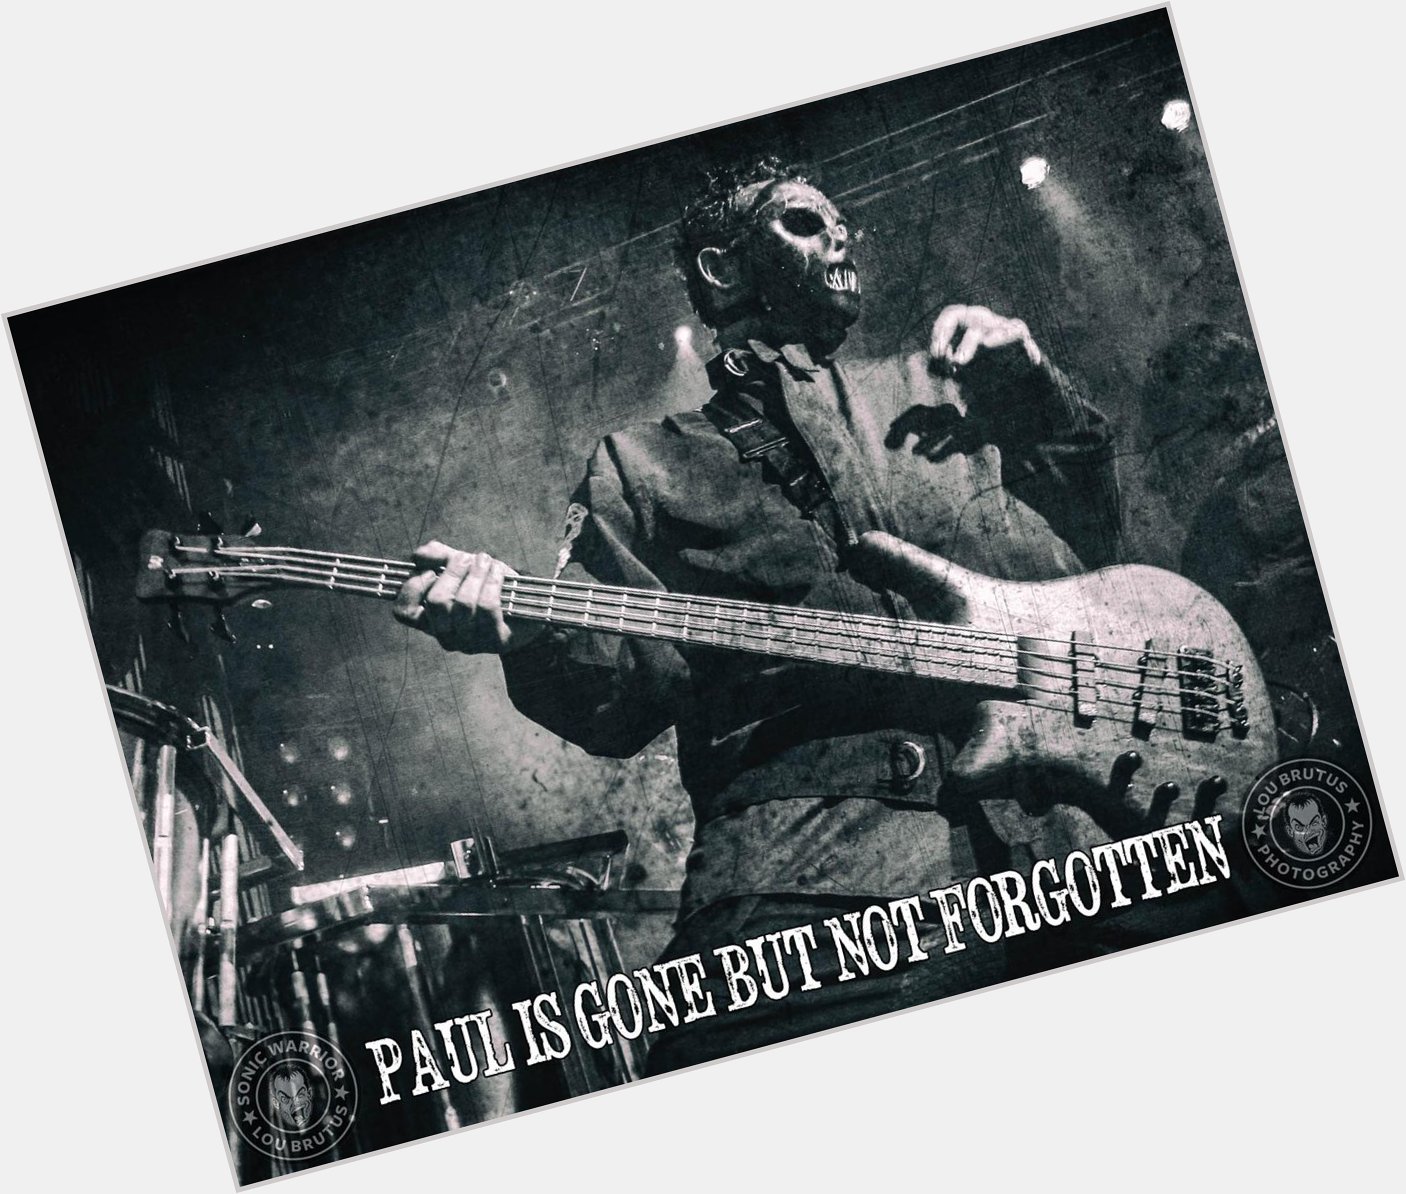 HAPPY BDAY PAUL: Paul Gray of Gone but not forgotten. Photo © 2004 by   